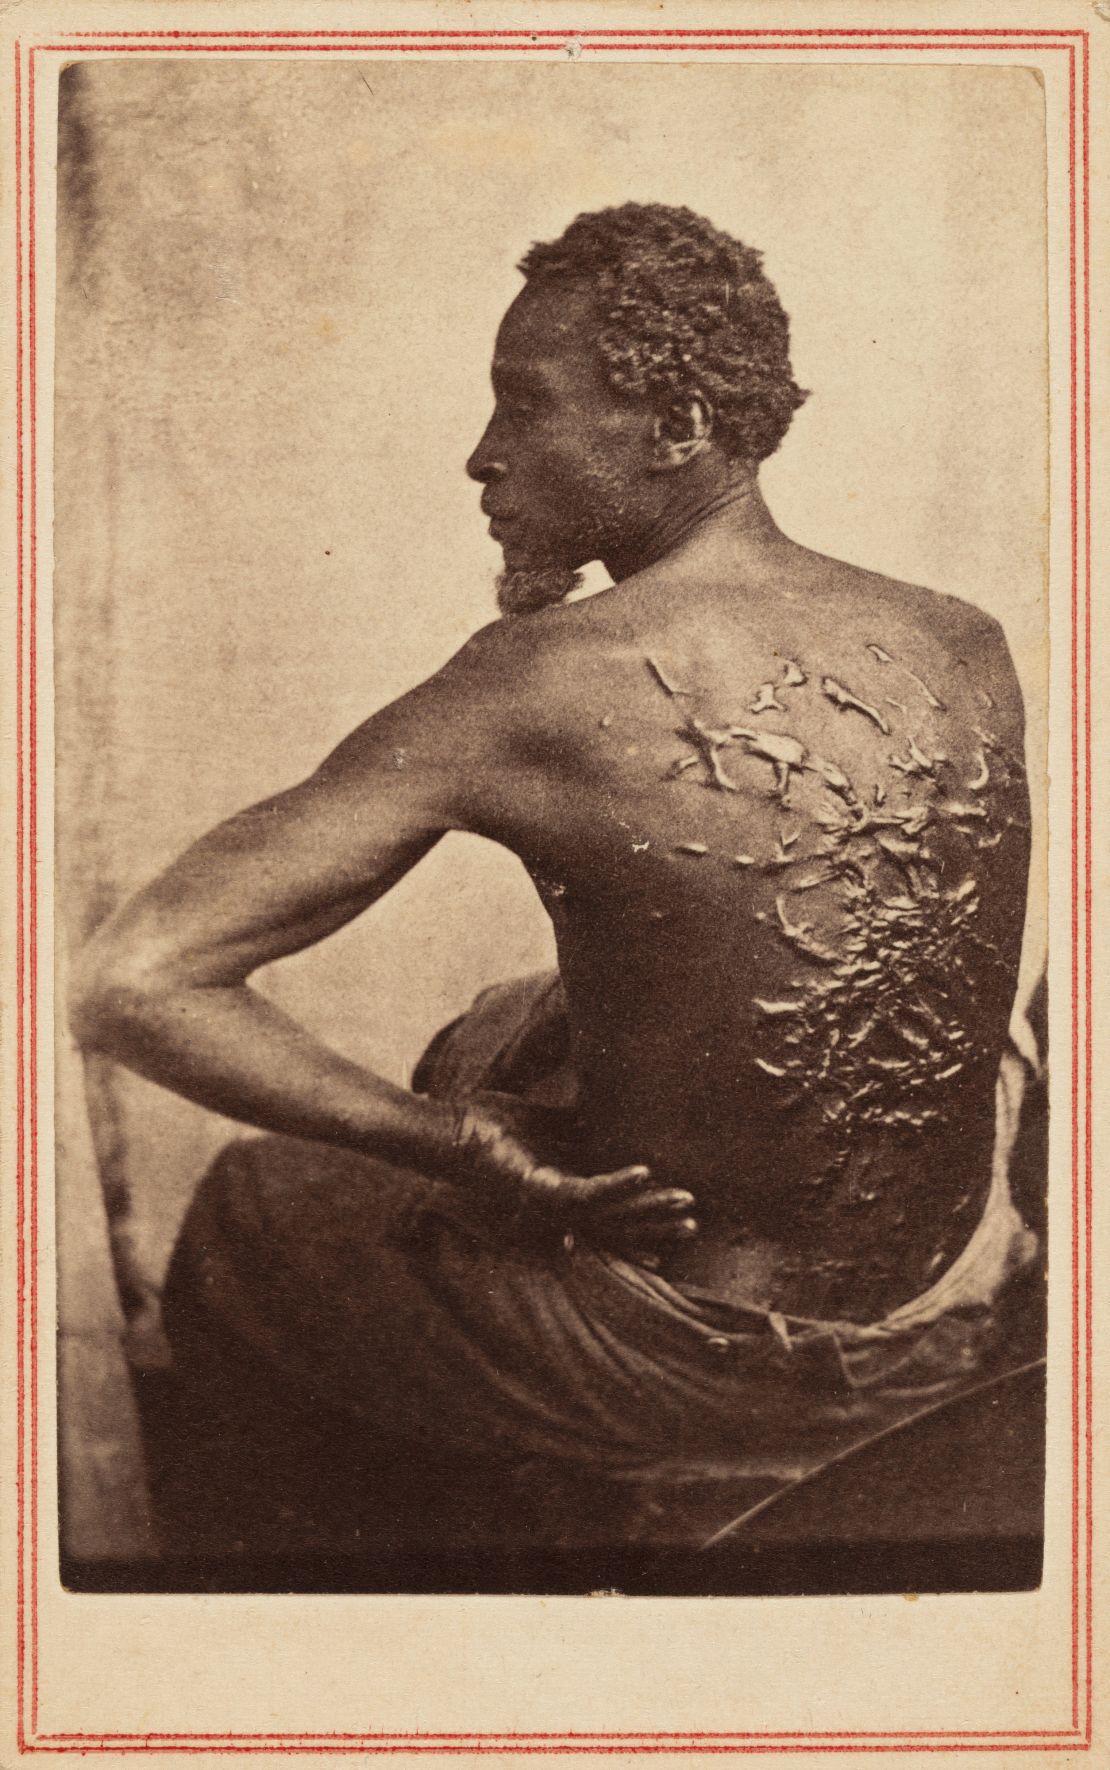 Taken around 1863, and attributed to a duo known as McPherson & Oliver, "The Scourged Back" depicts a man with scars from whippings he'd received as a slave.